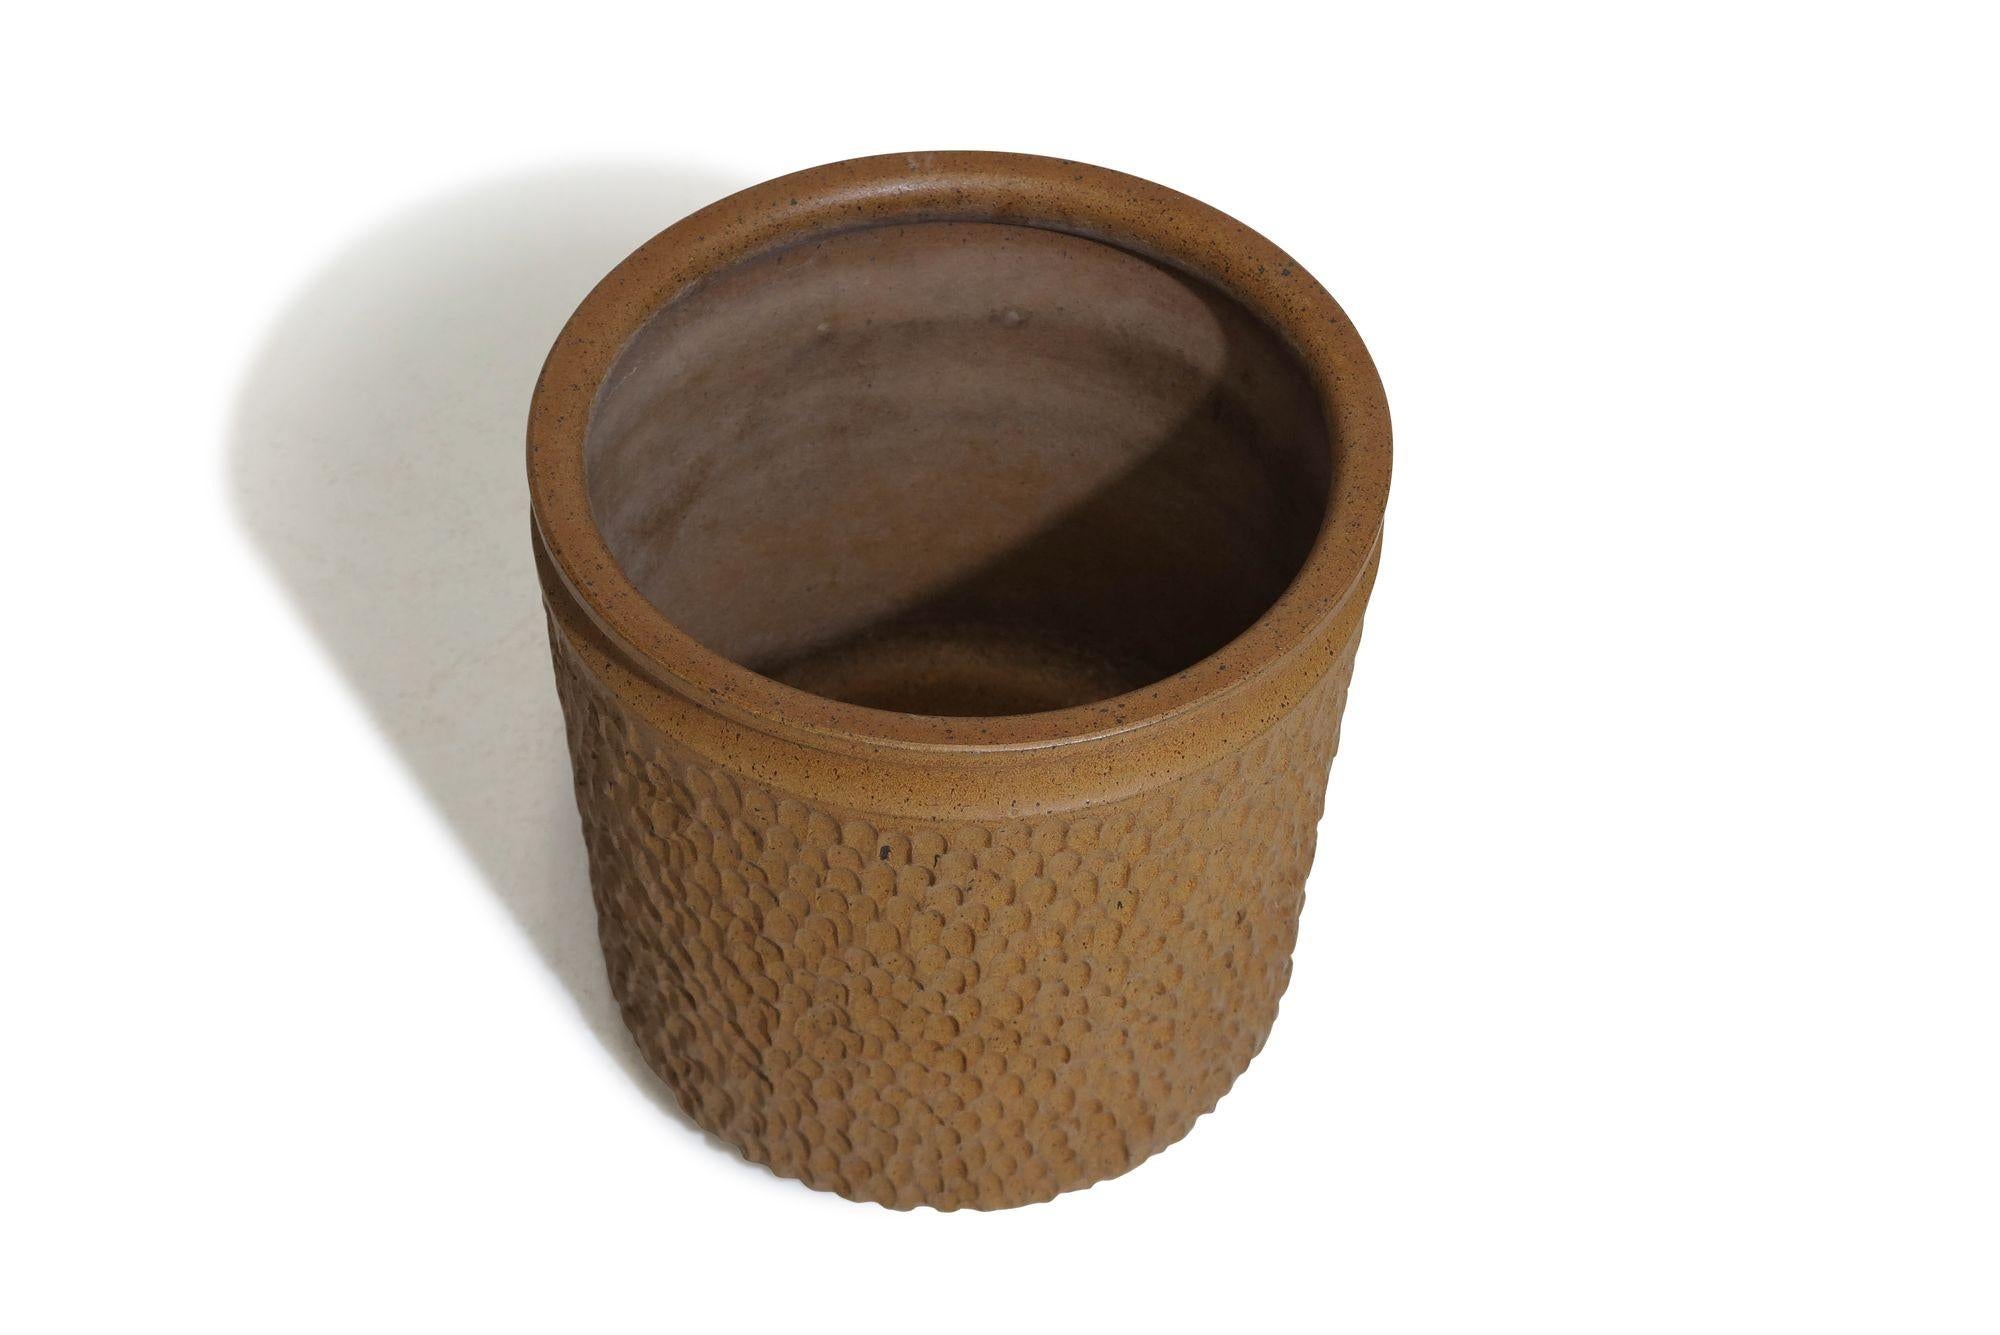 Large Robert Maxwell & David Cressey Thumbprint planter for Earthgender in a textured earthenware with a beautiful brown glaze.
Diameter 17,50'' x H 18,50''